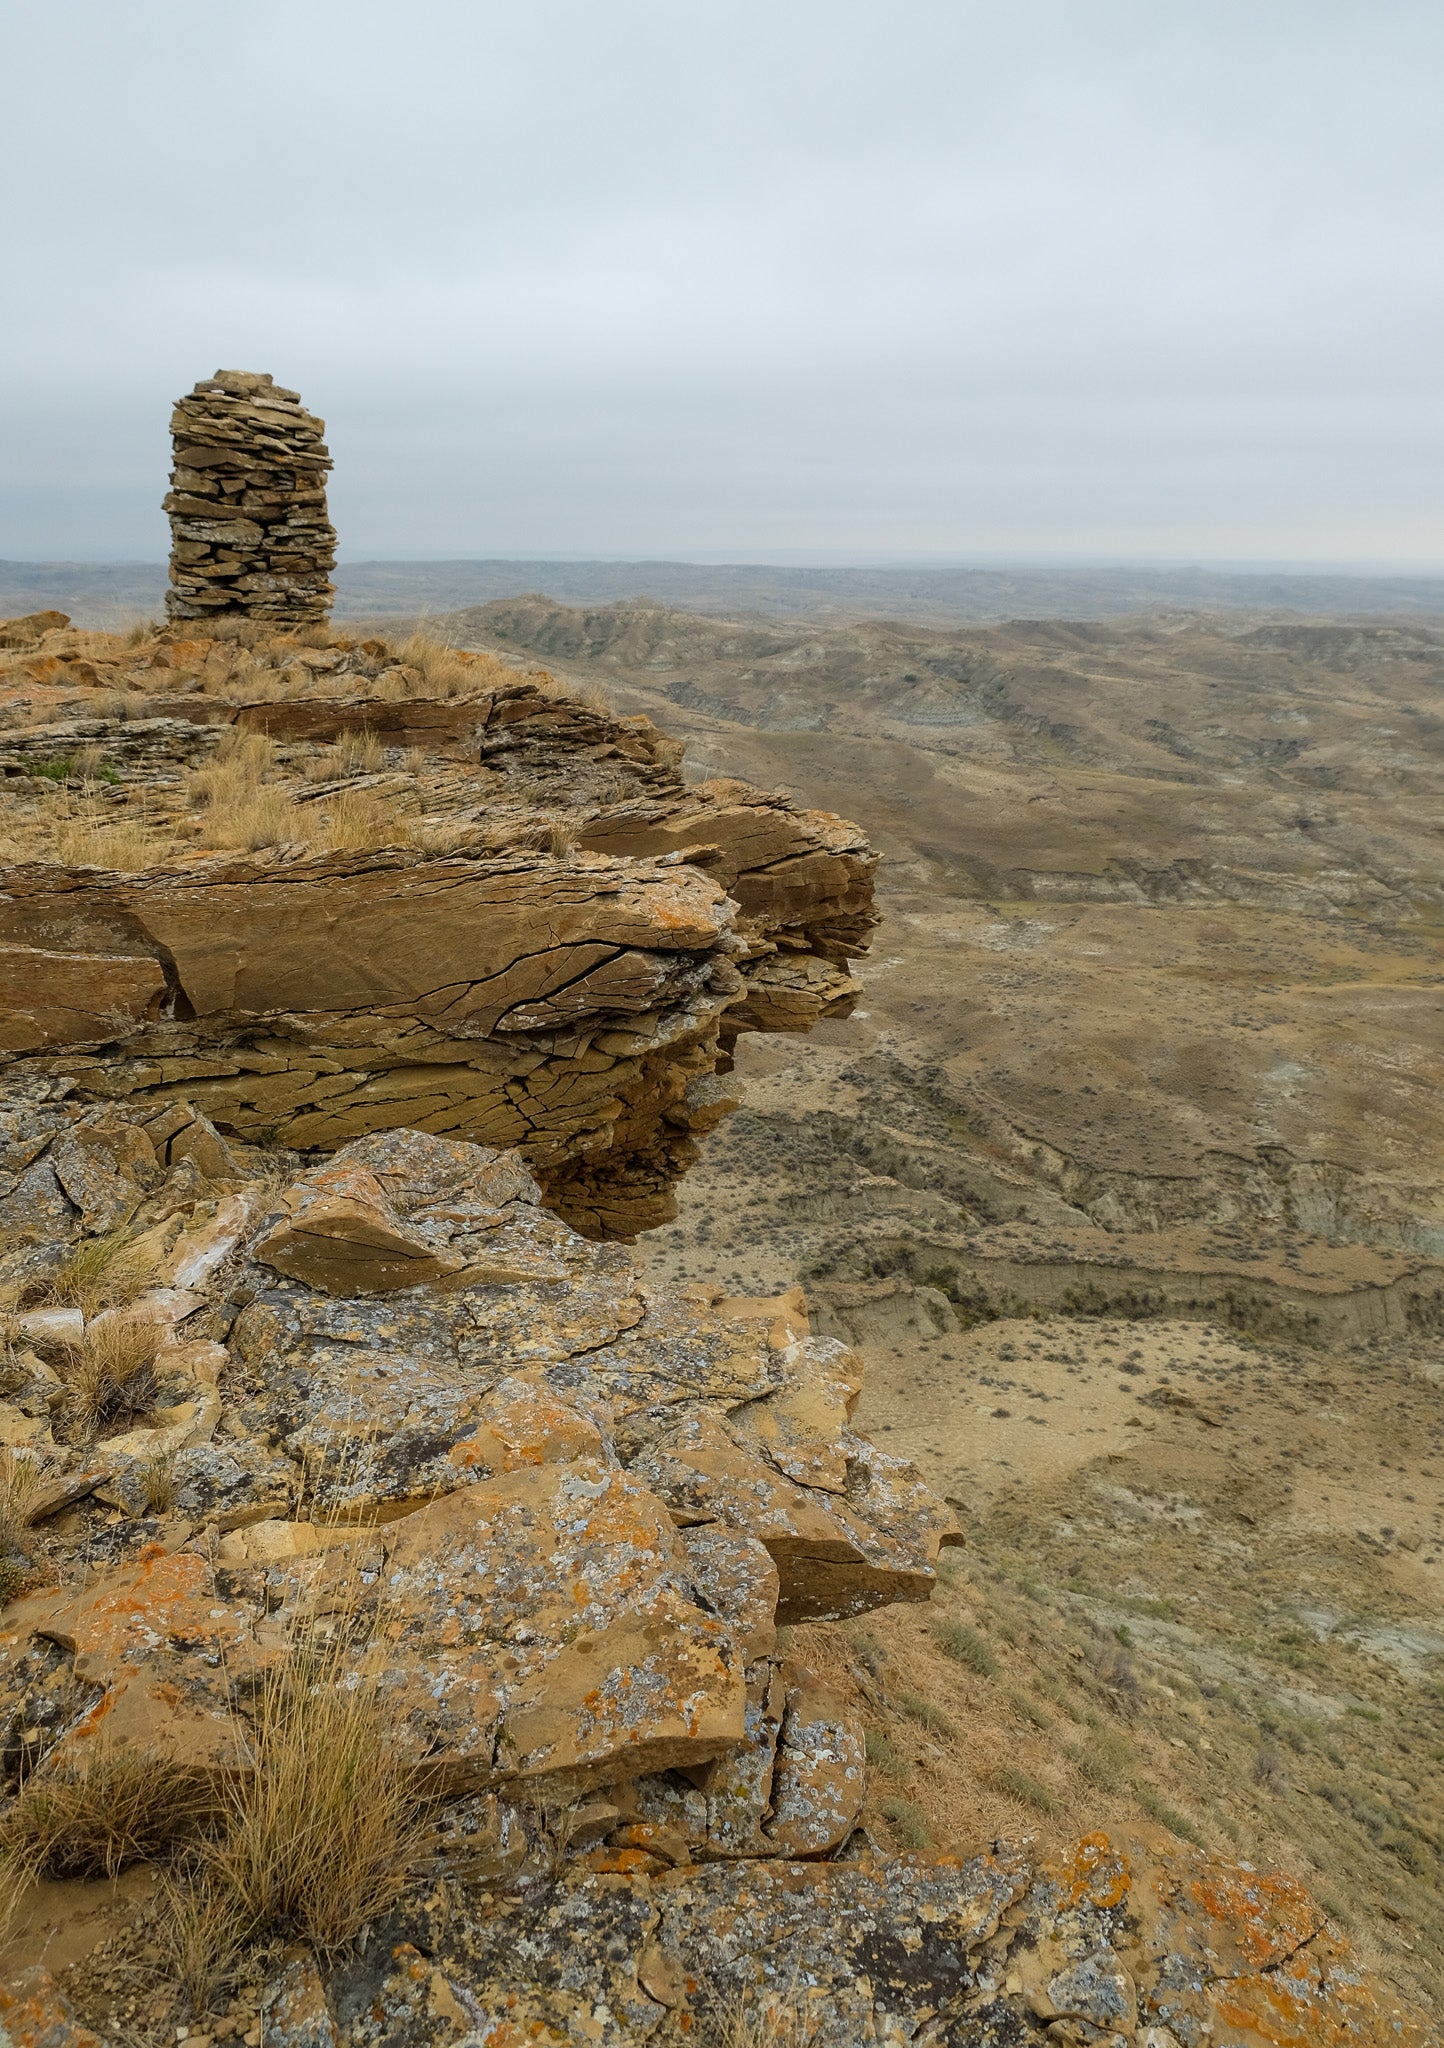 A cairn marking the site of the 1886 Hornady bison camp in Montana.